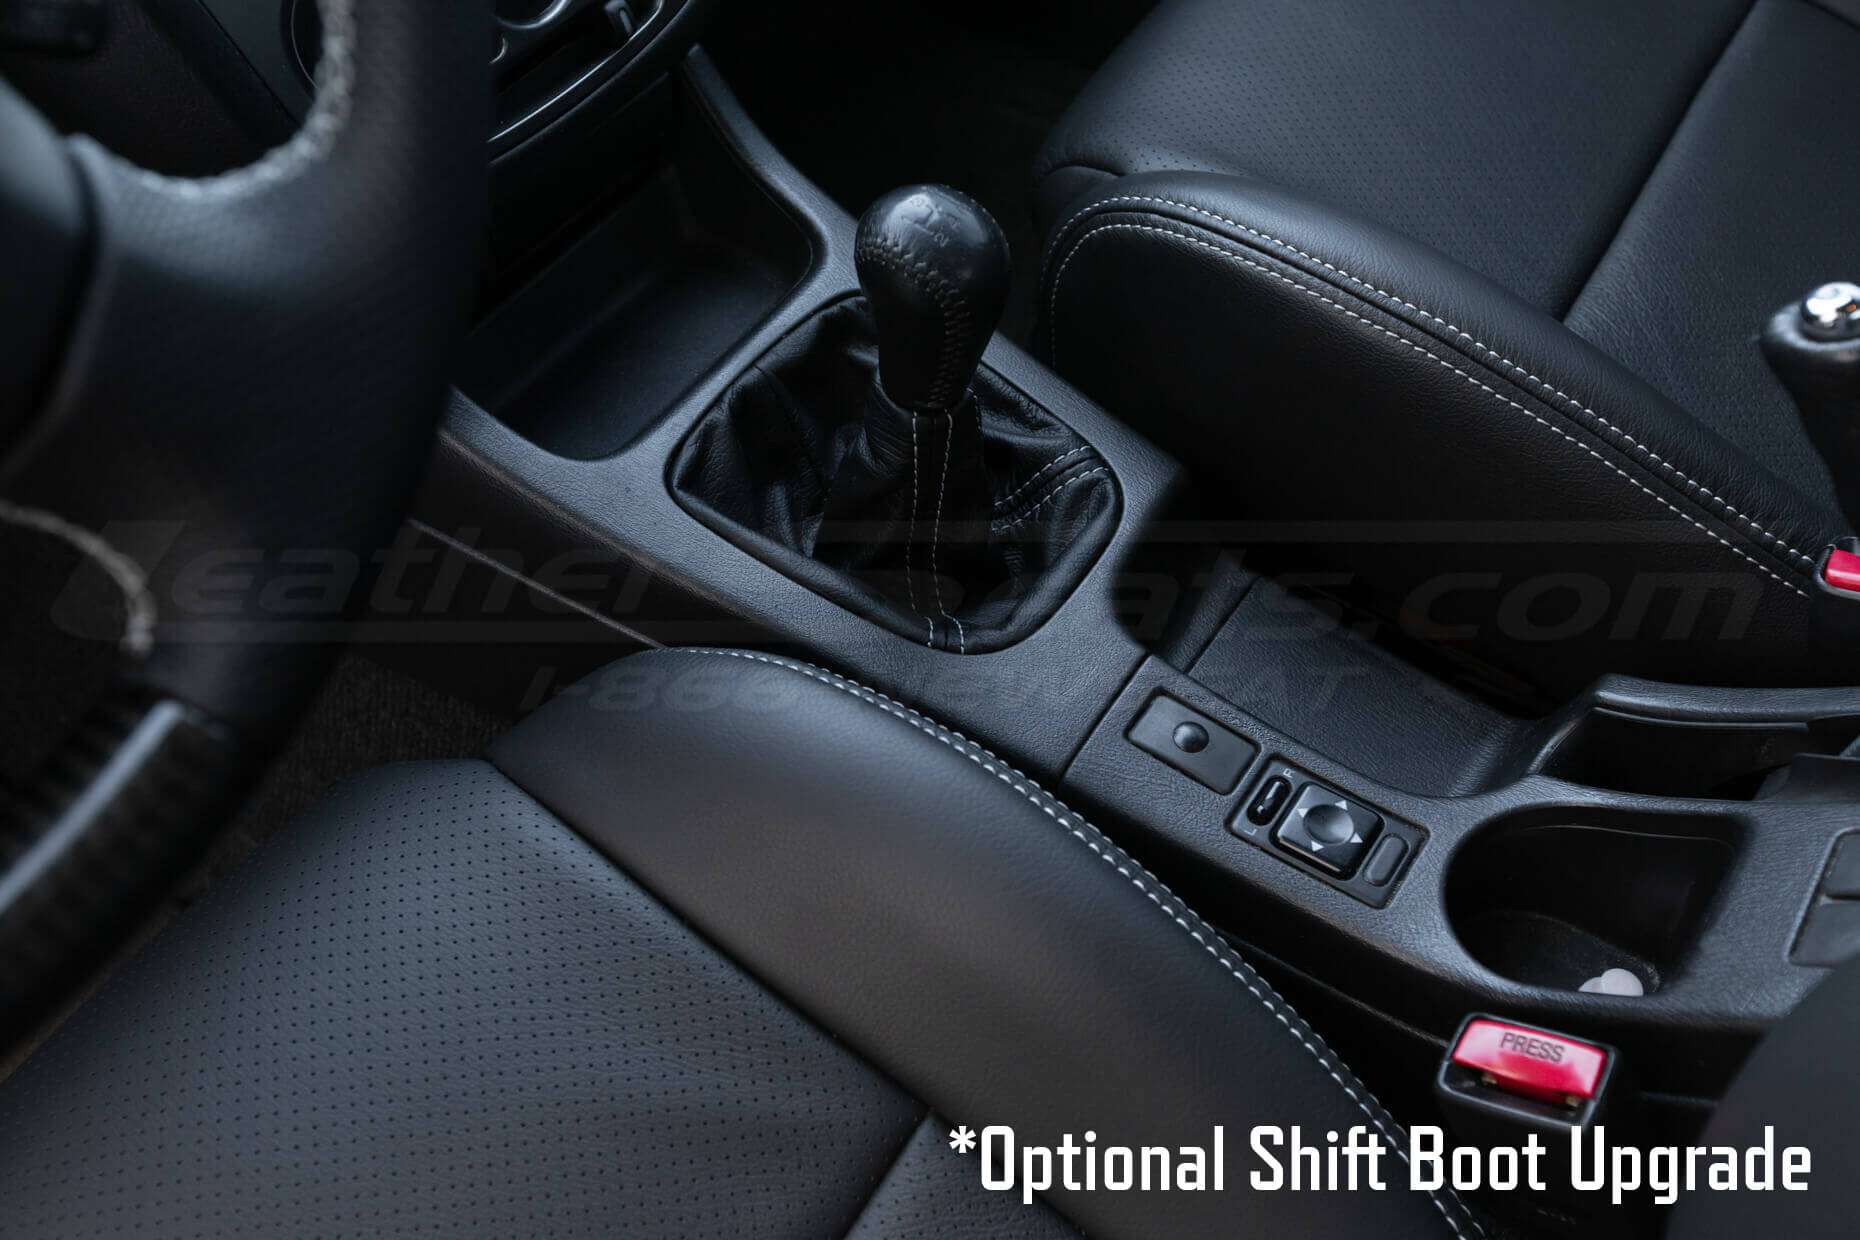 Option Shift Boot wide view